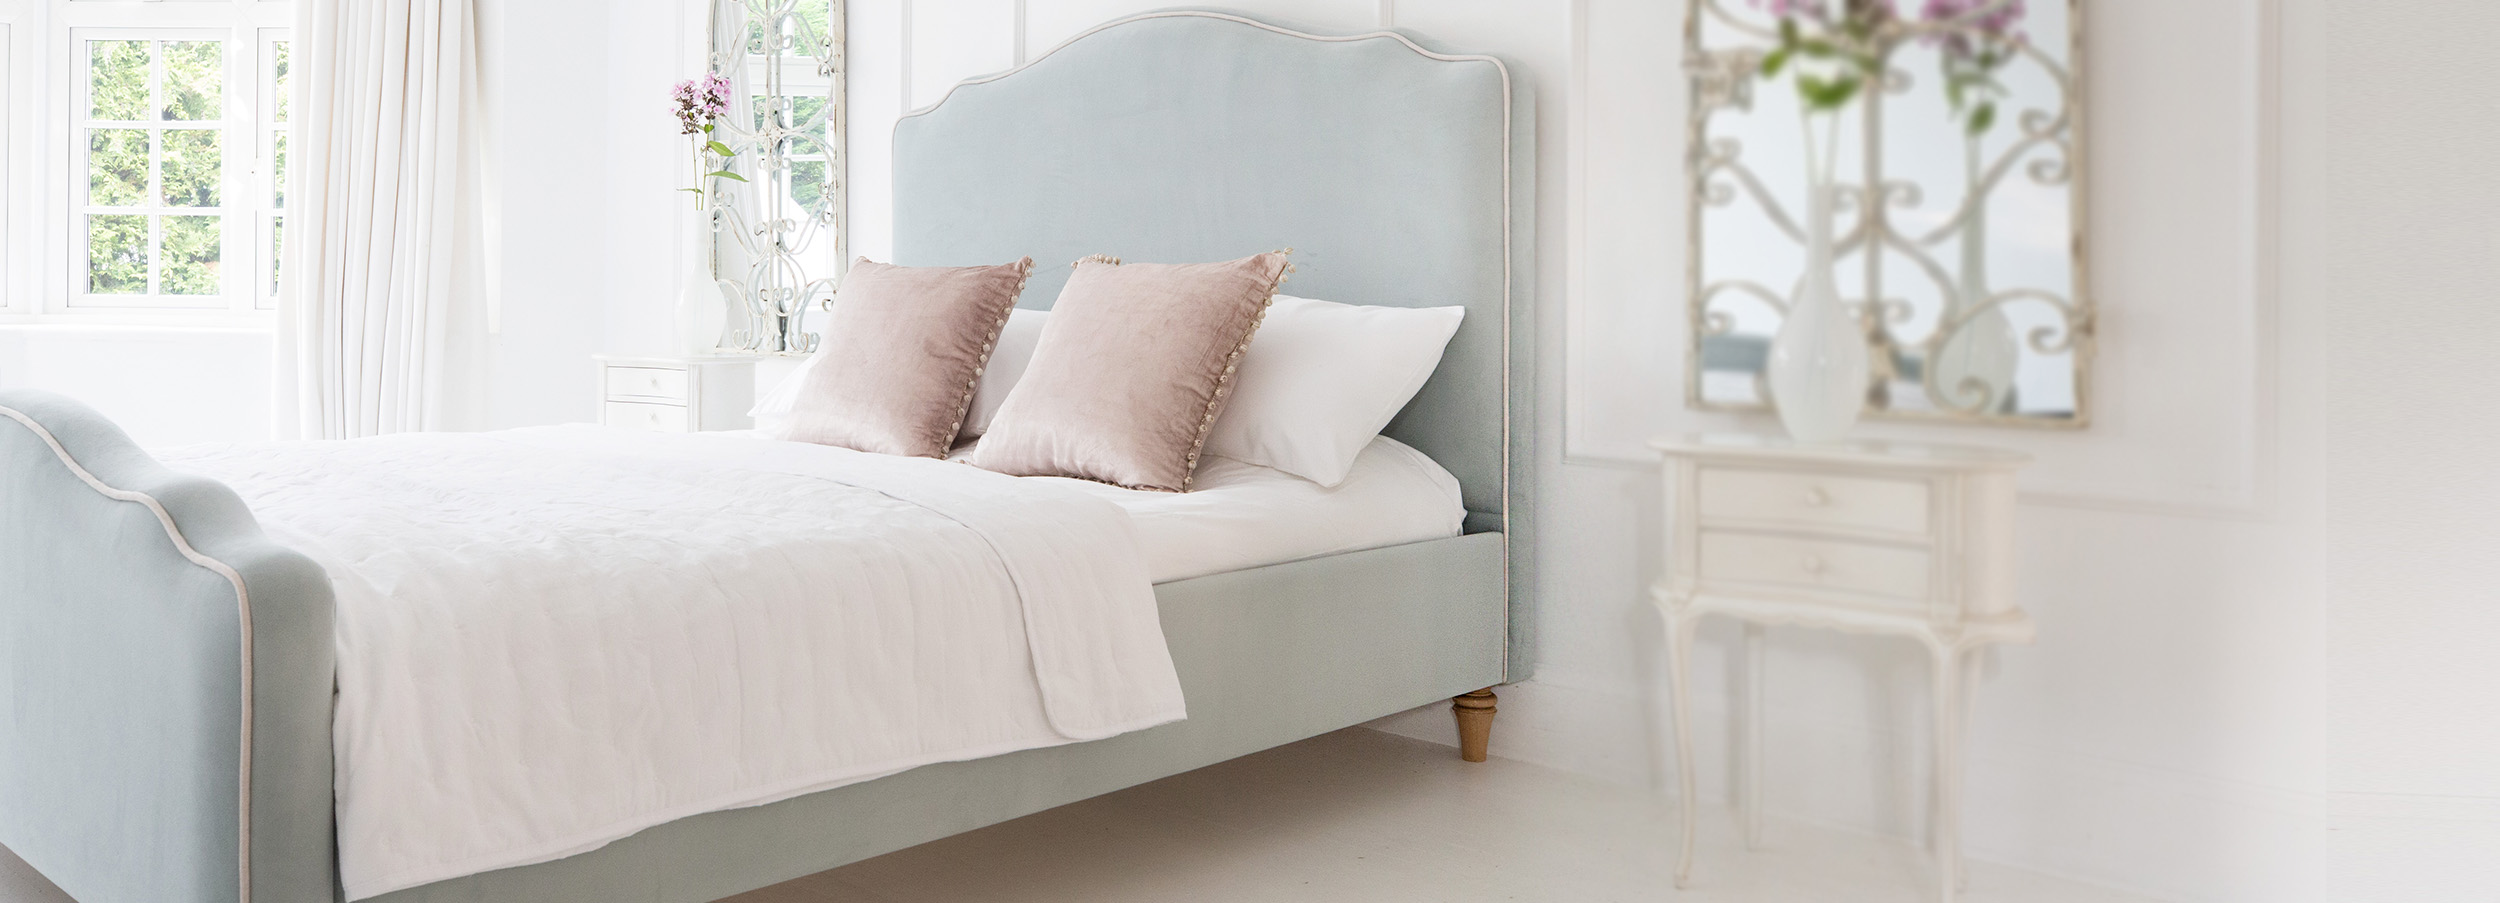 SHOP FRENCH BEDS